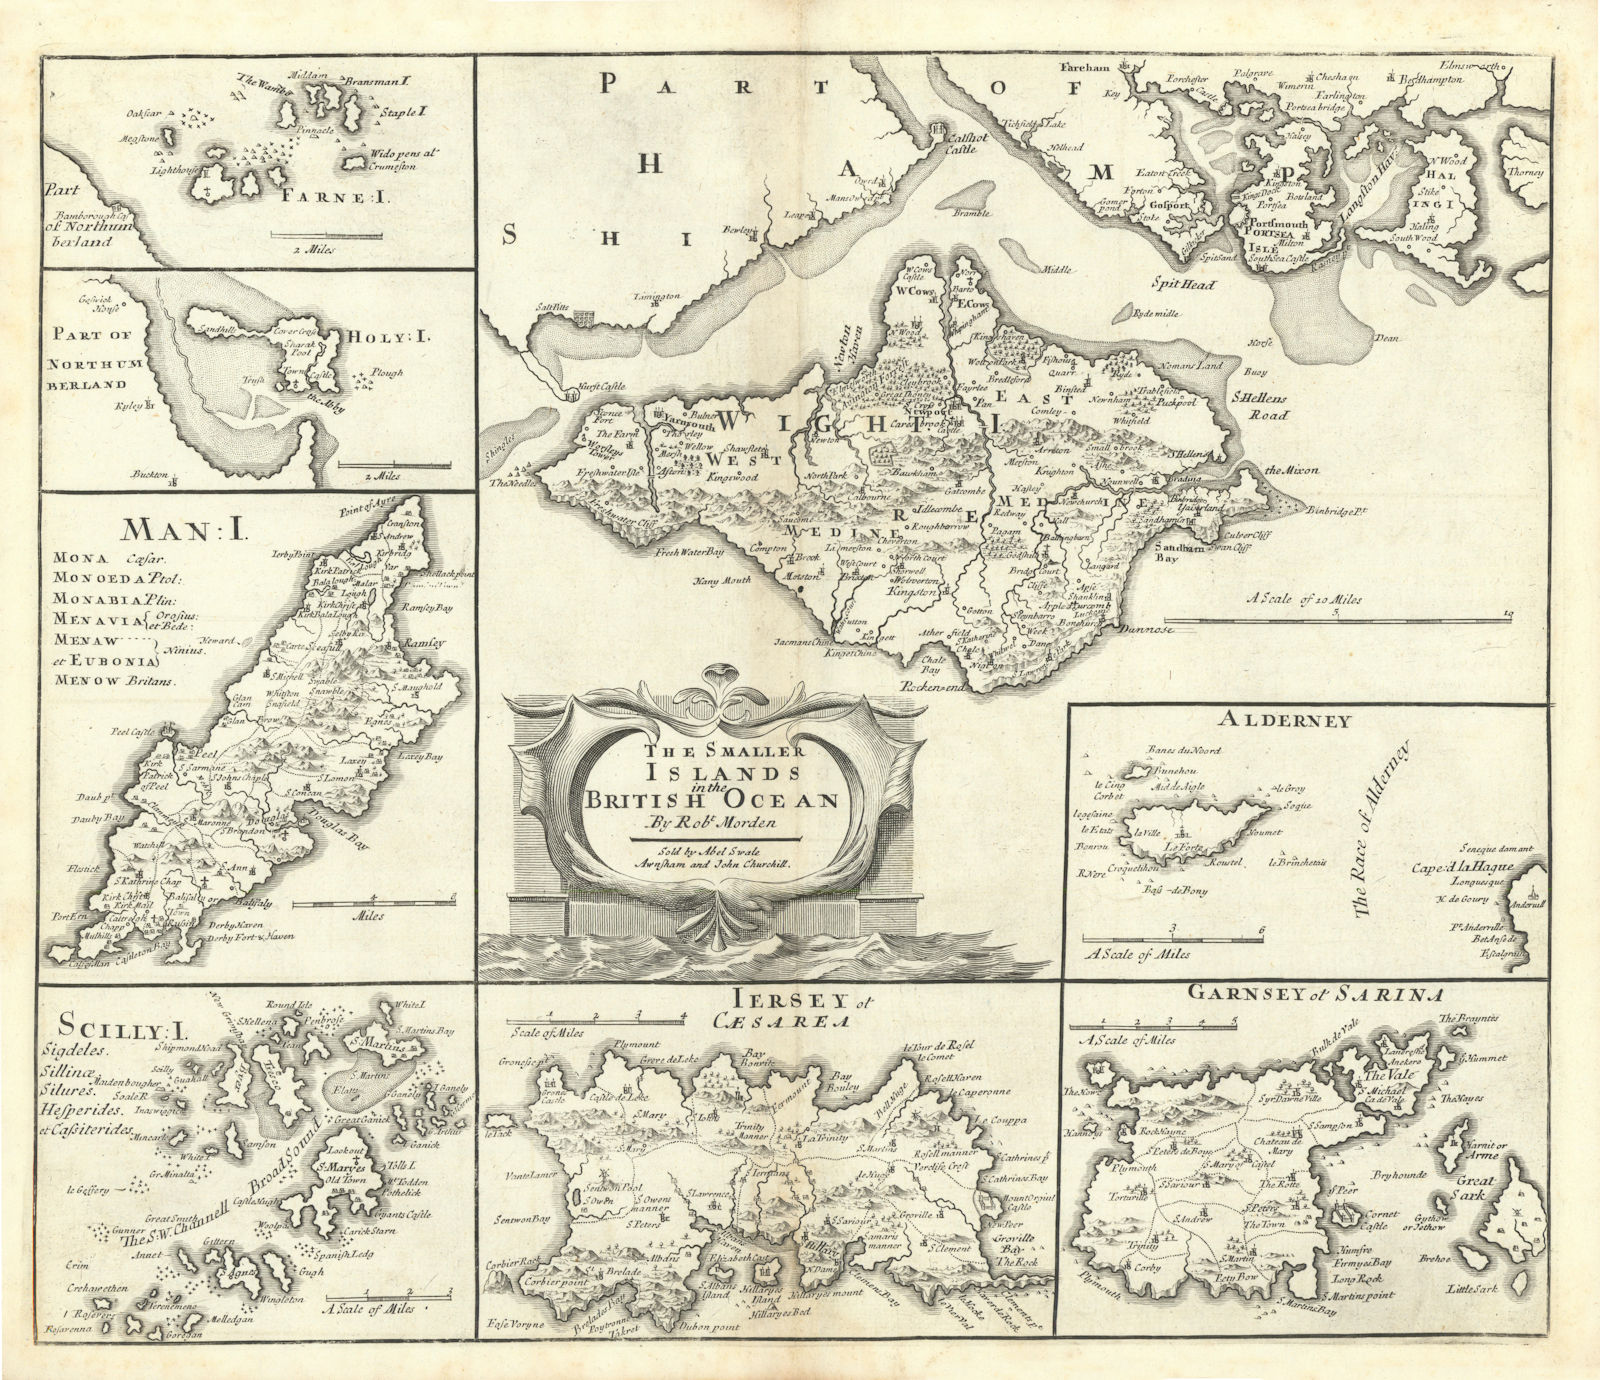 Associate Product ENGLAND. Isles of Wight/Man Scilly Isles Farne/Channel Islands. MORDEN 1722 map